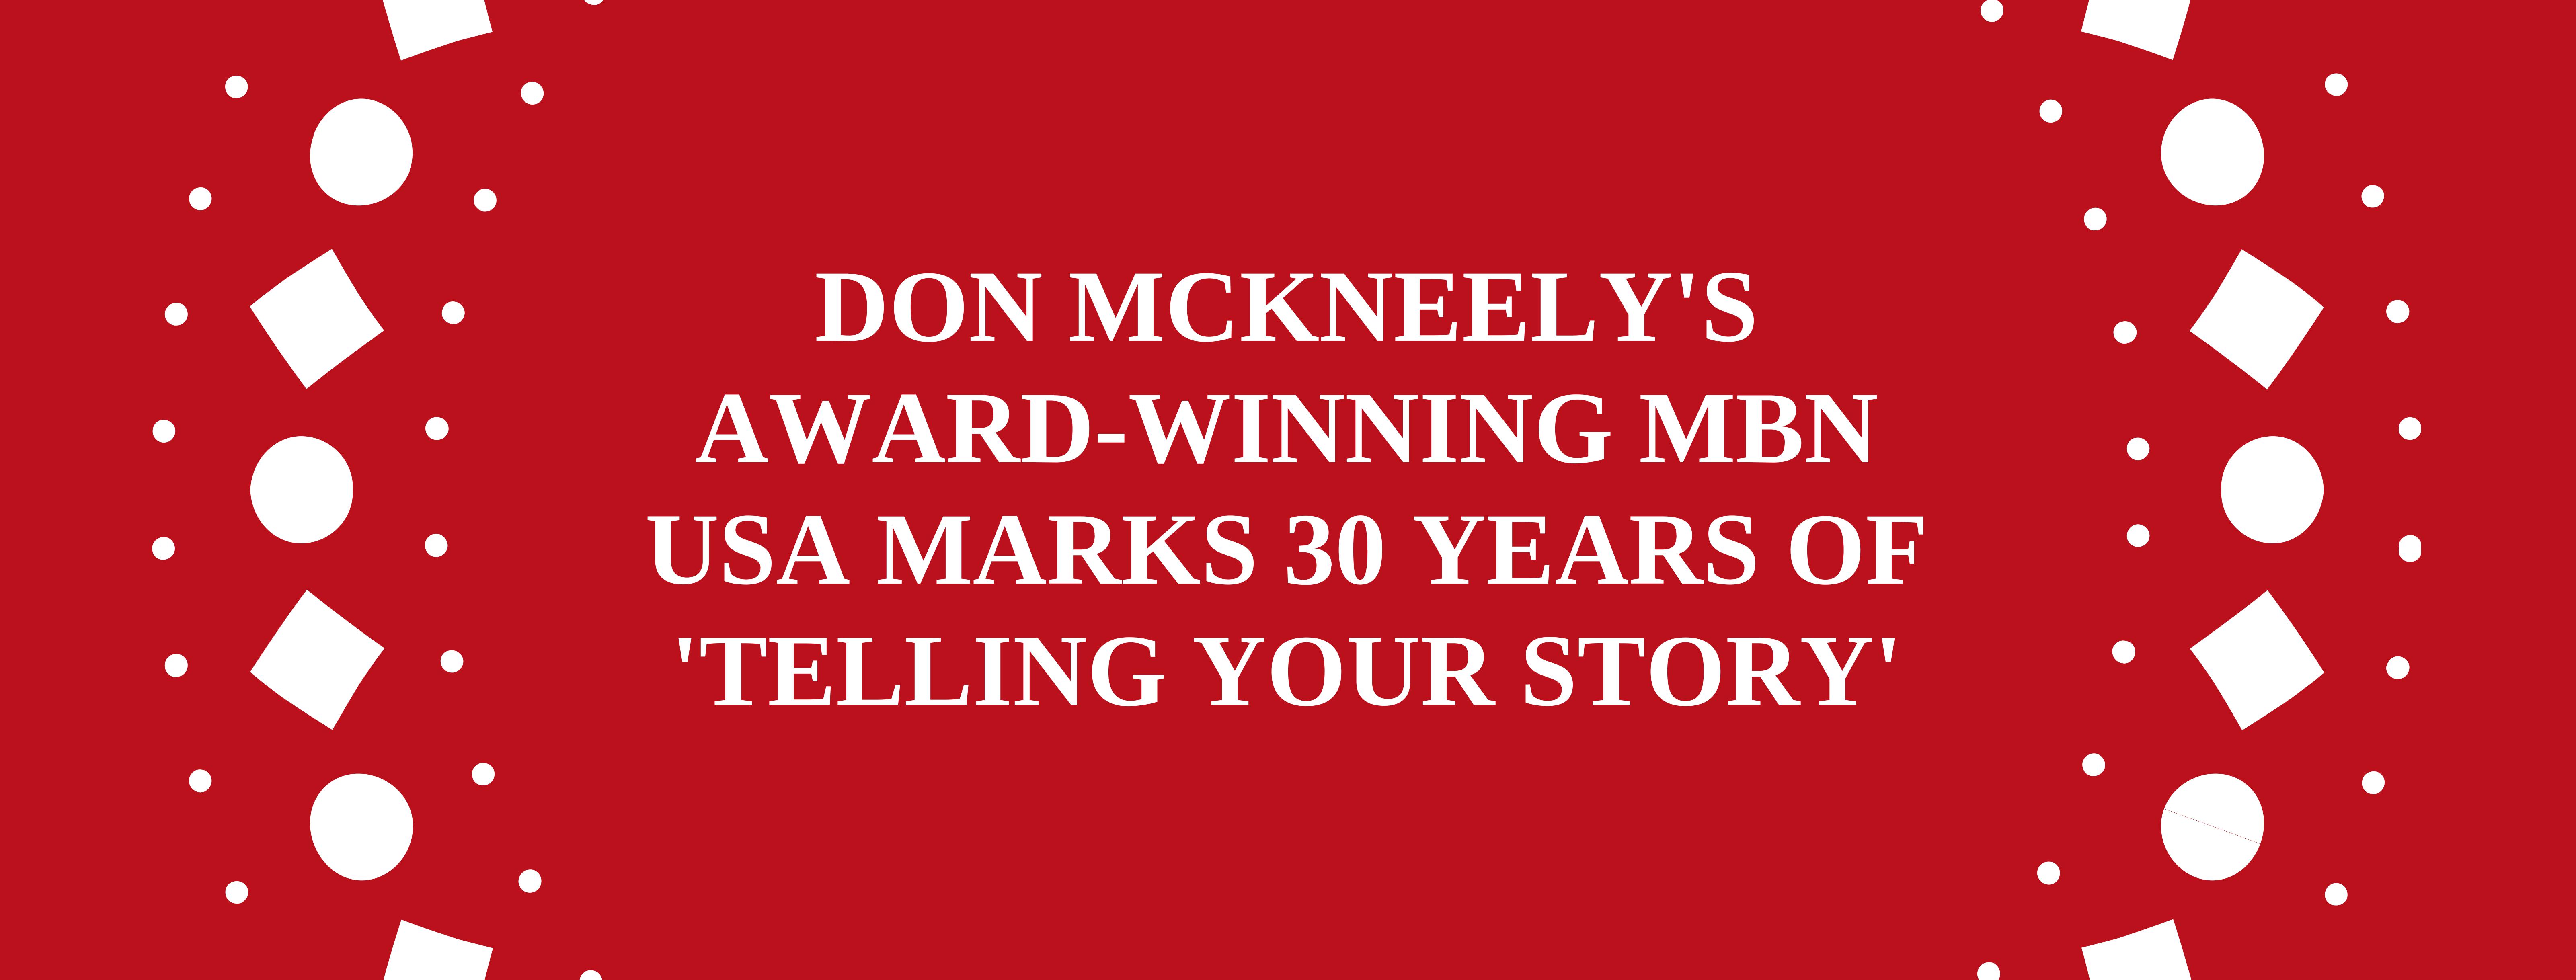 DON MCKNEELY'S AWARD-WINNING MBN USA MARKS 30 YEARS OF 'TELLING YOUR STORY'